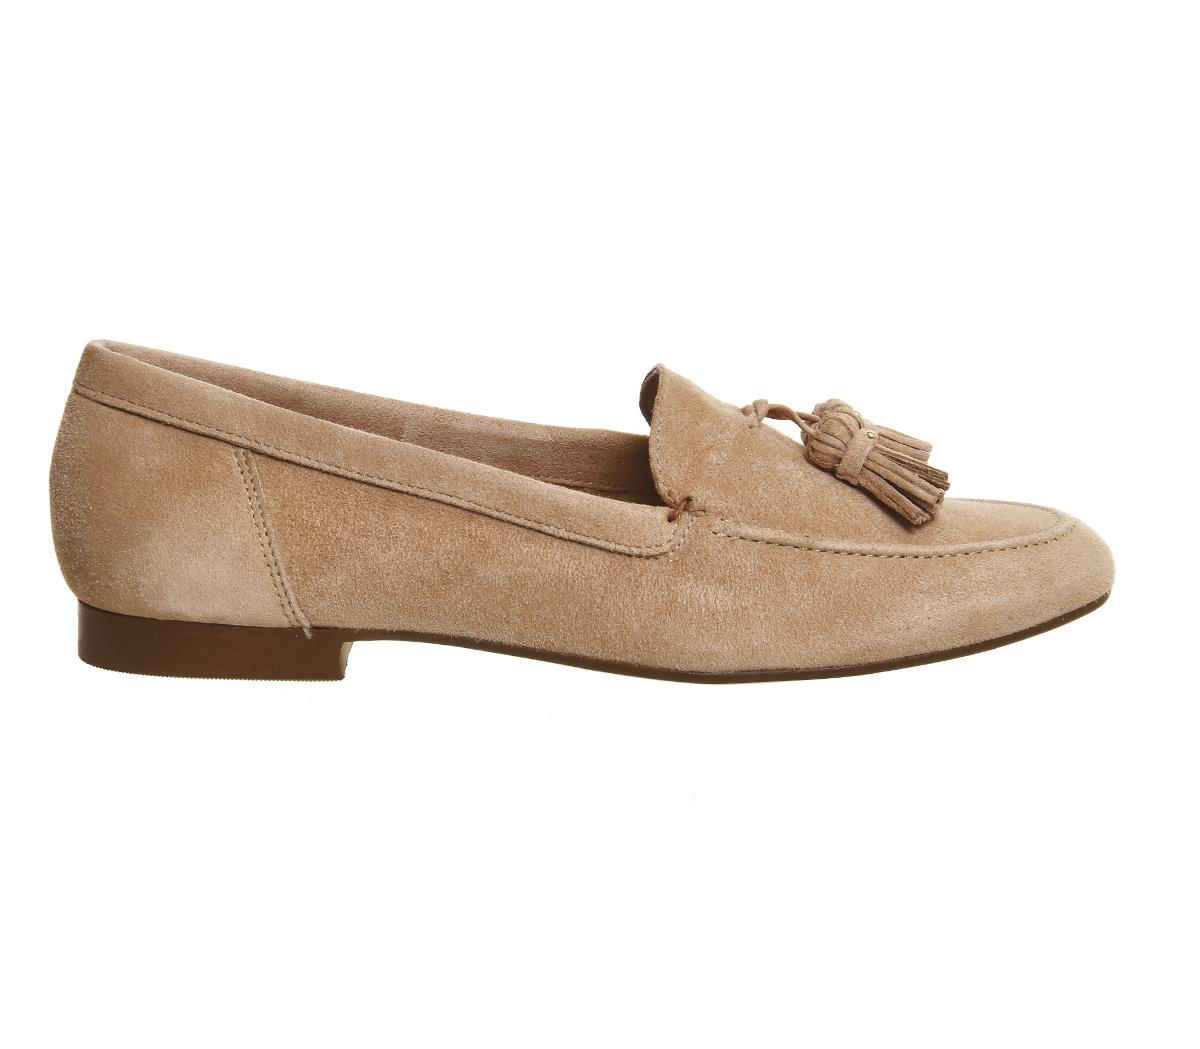 Office Retro Tassel Loafers Nude Suede - Flats